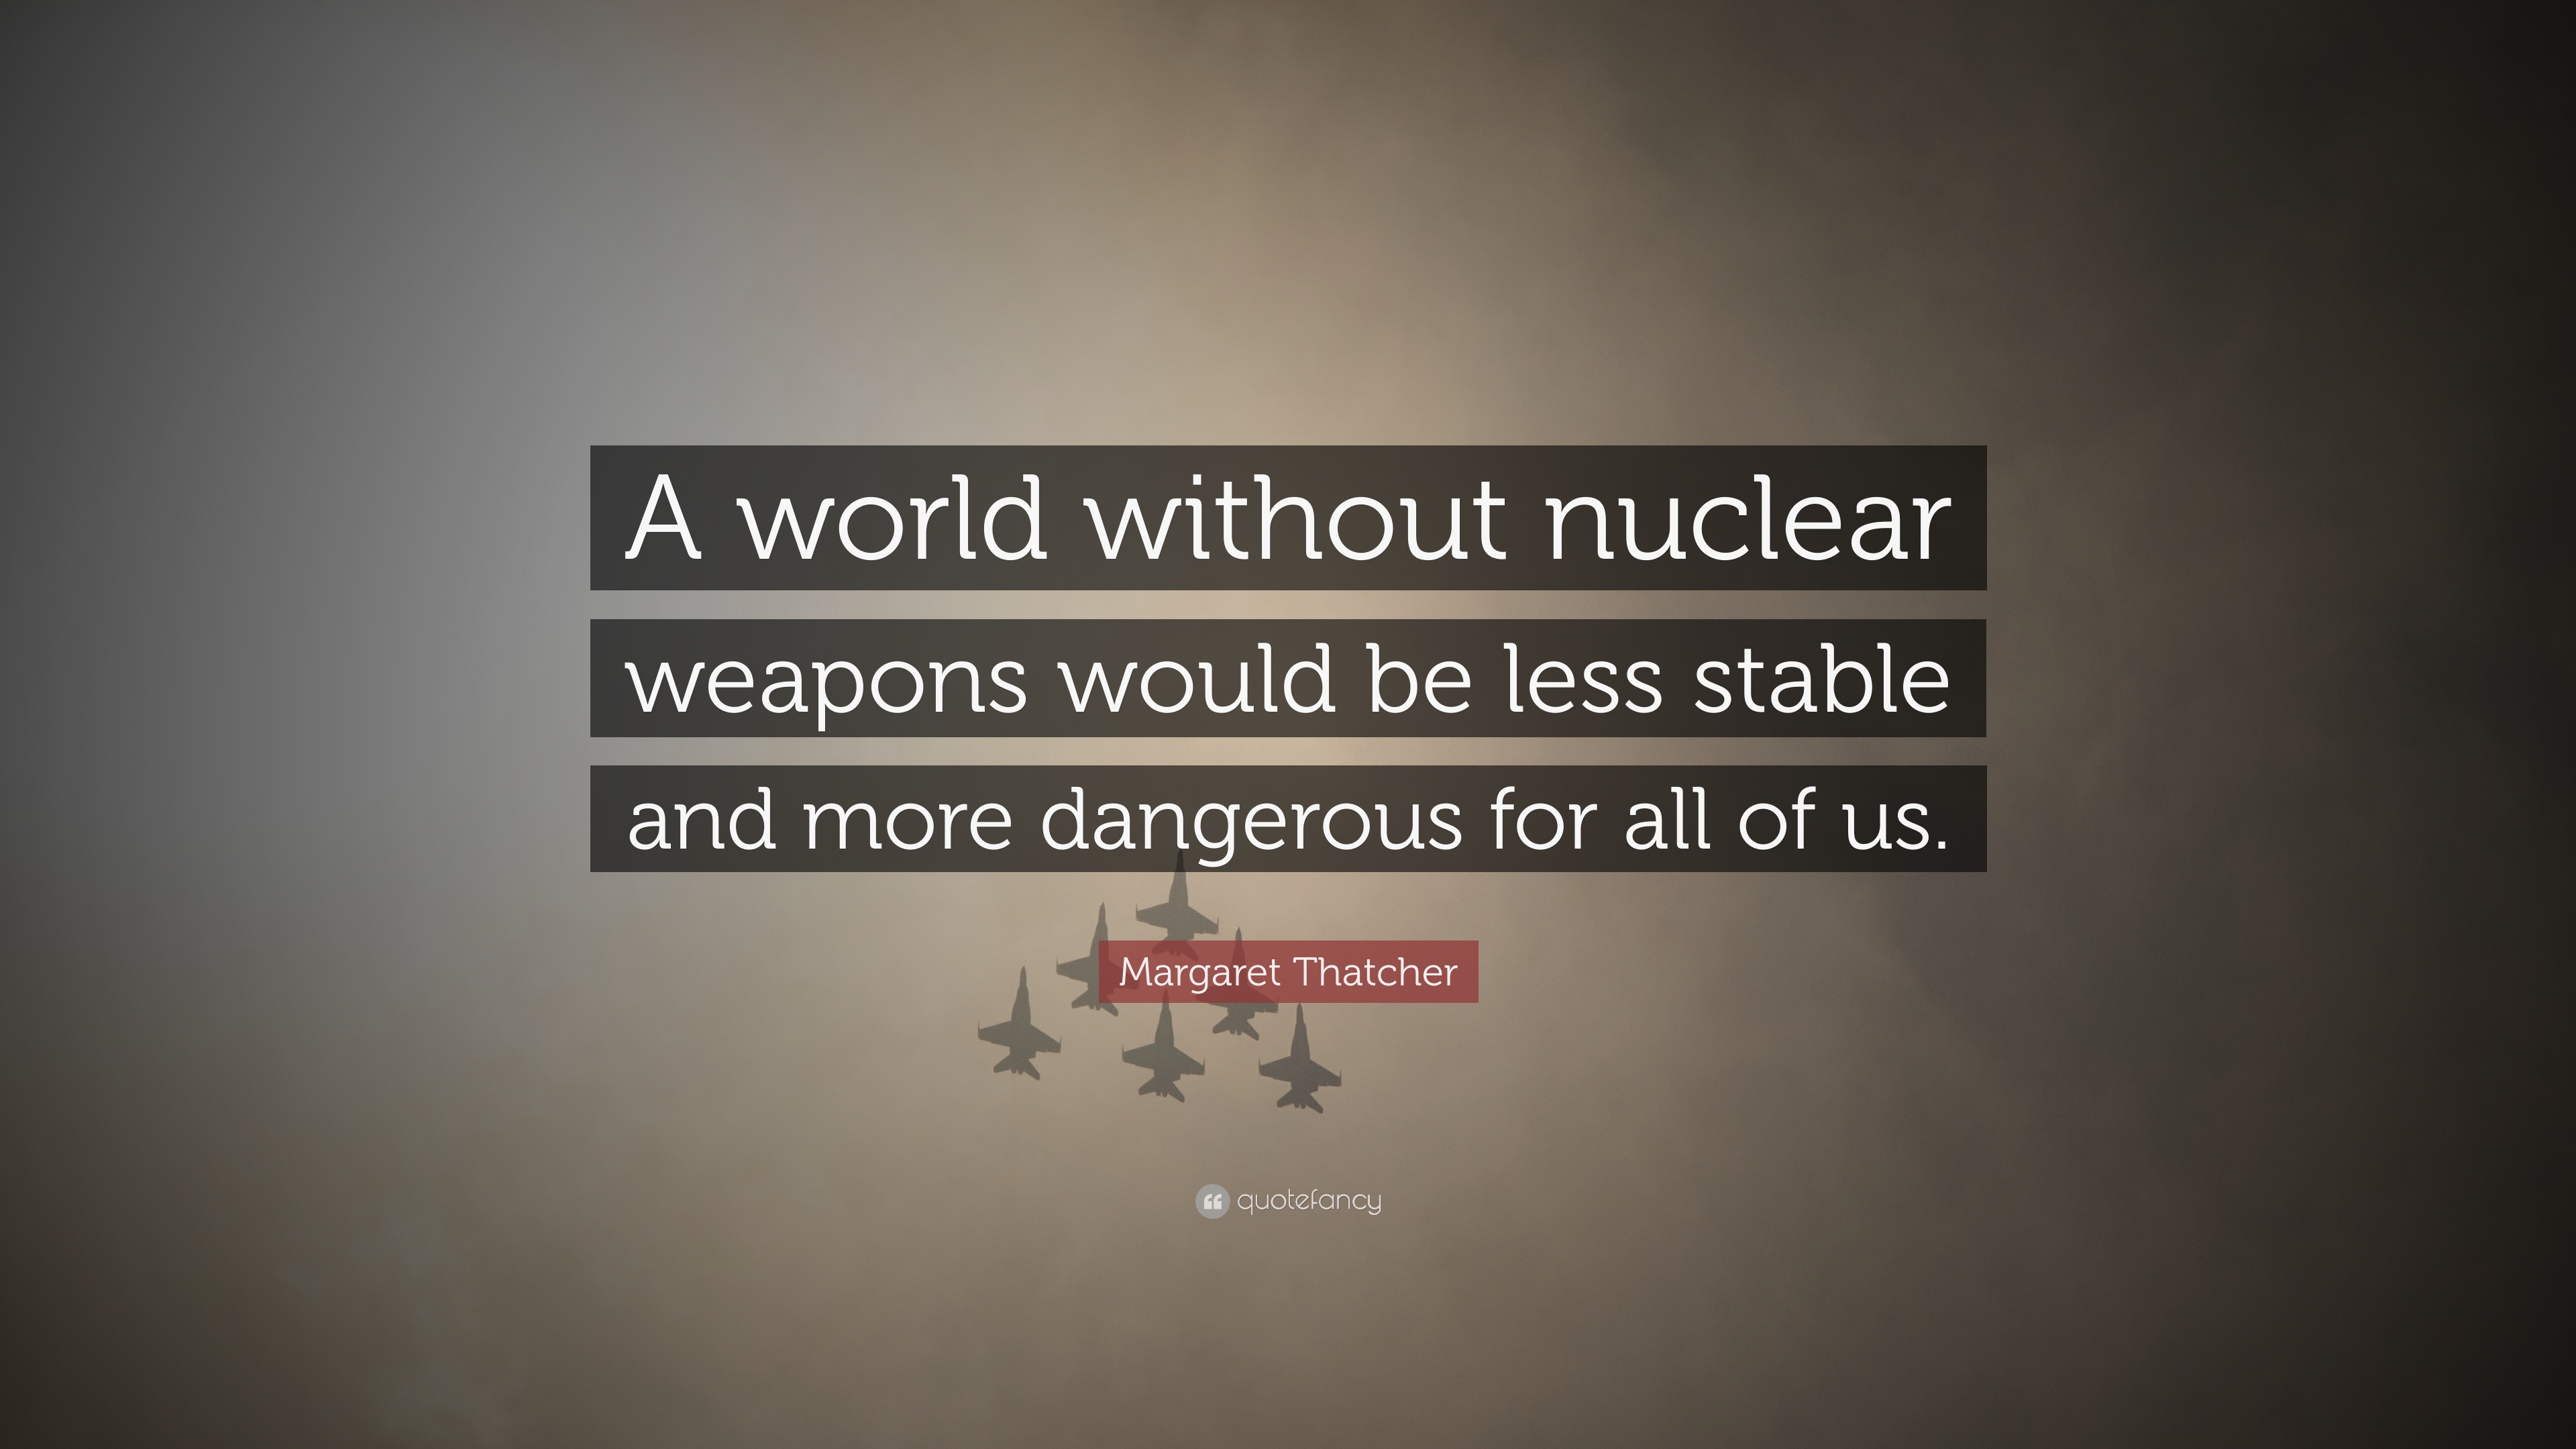 Margaret Thatcher Quote: “A world without nuclear weapons would be less stable and more dangerous for